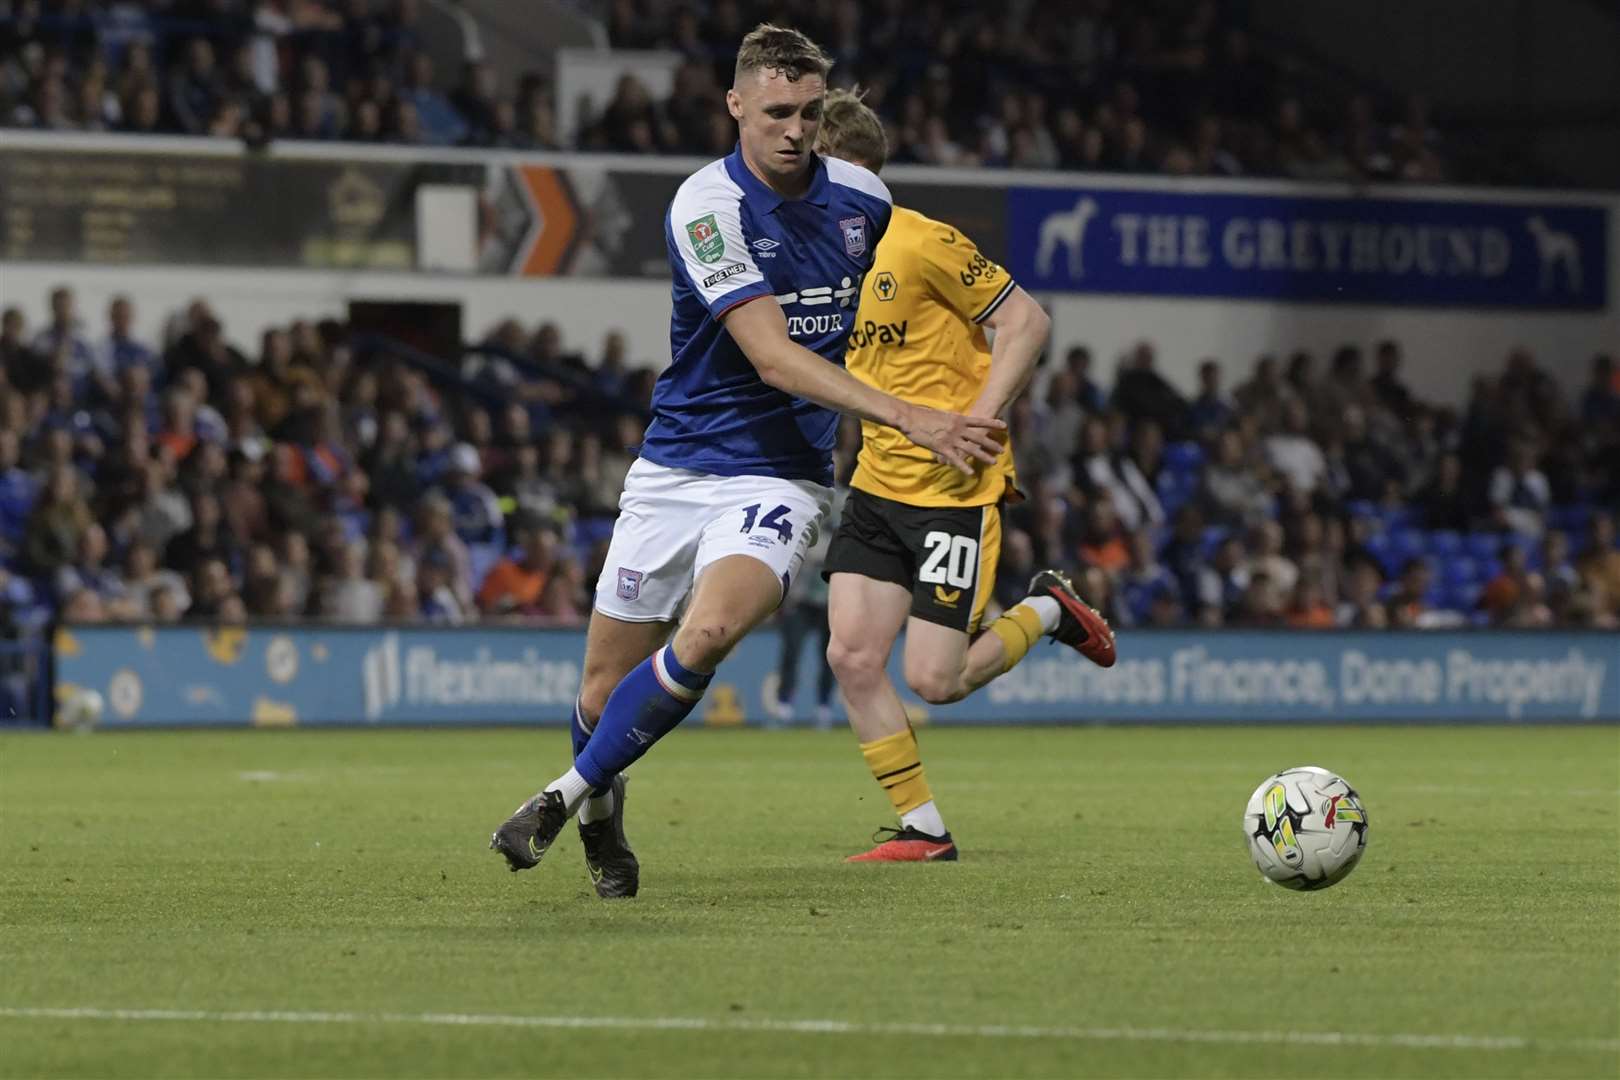 Jack Taylor scored Ipswich Town’s third goal against AFC Wimbledon Picture: Barry Goodwin